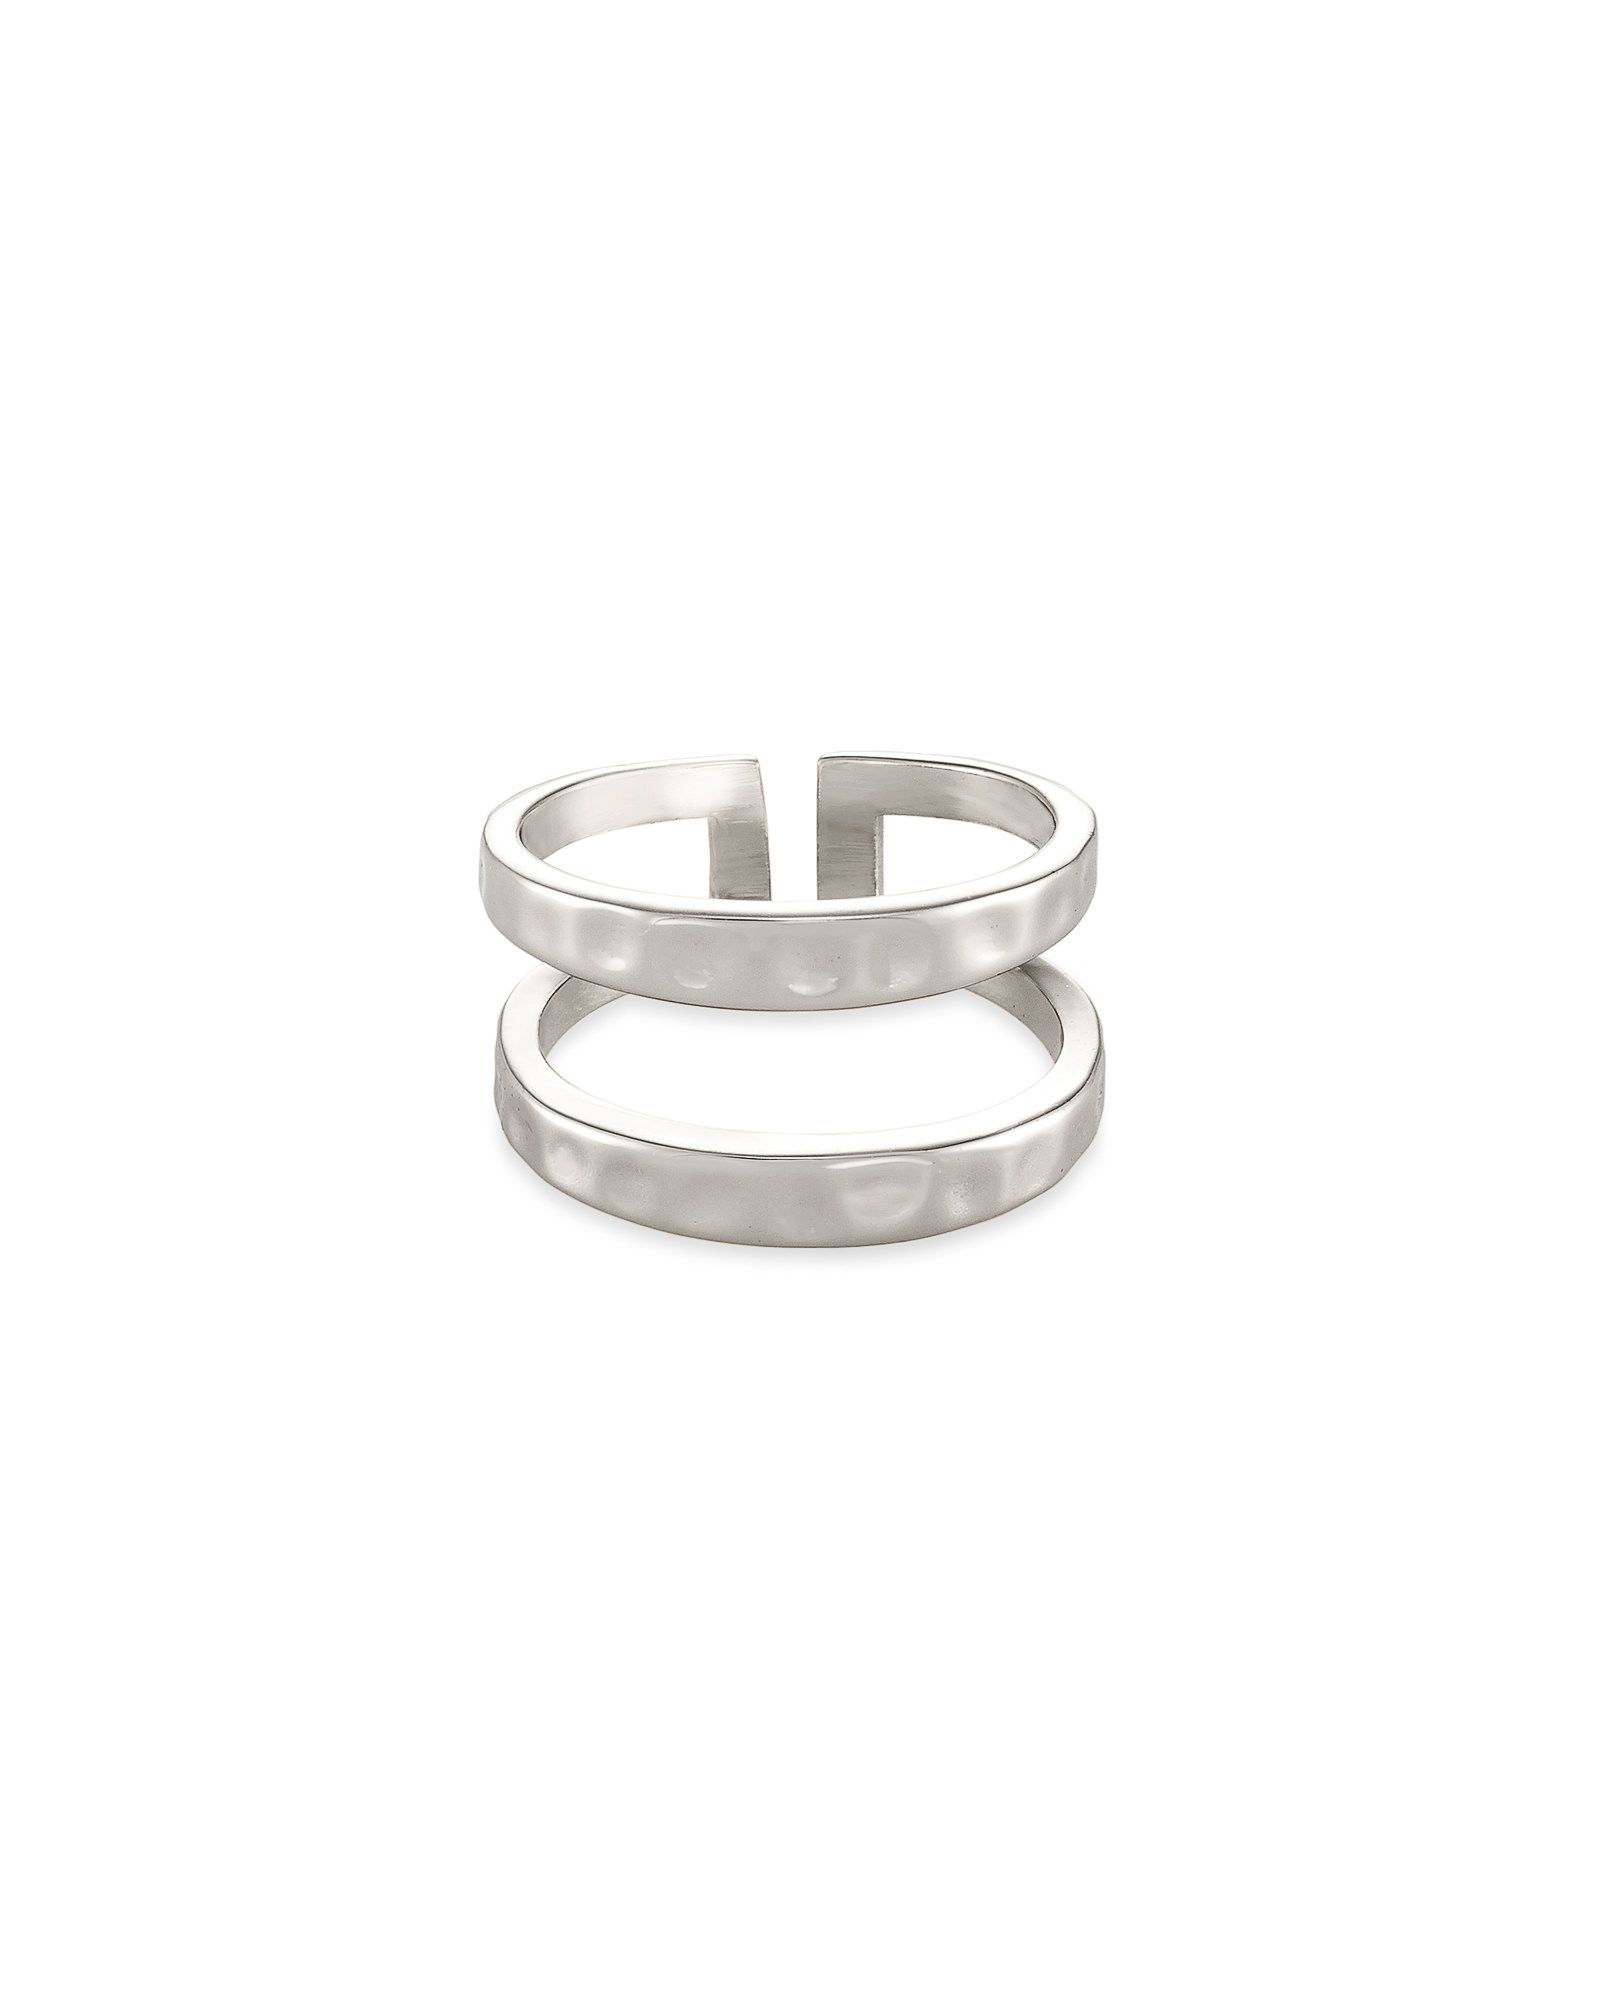 Zorte Double Band Ring in Silver | Kendra Scott